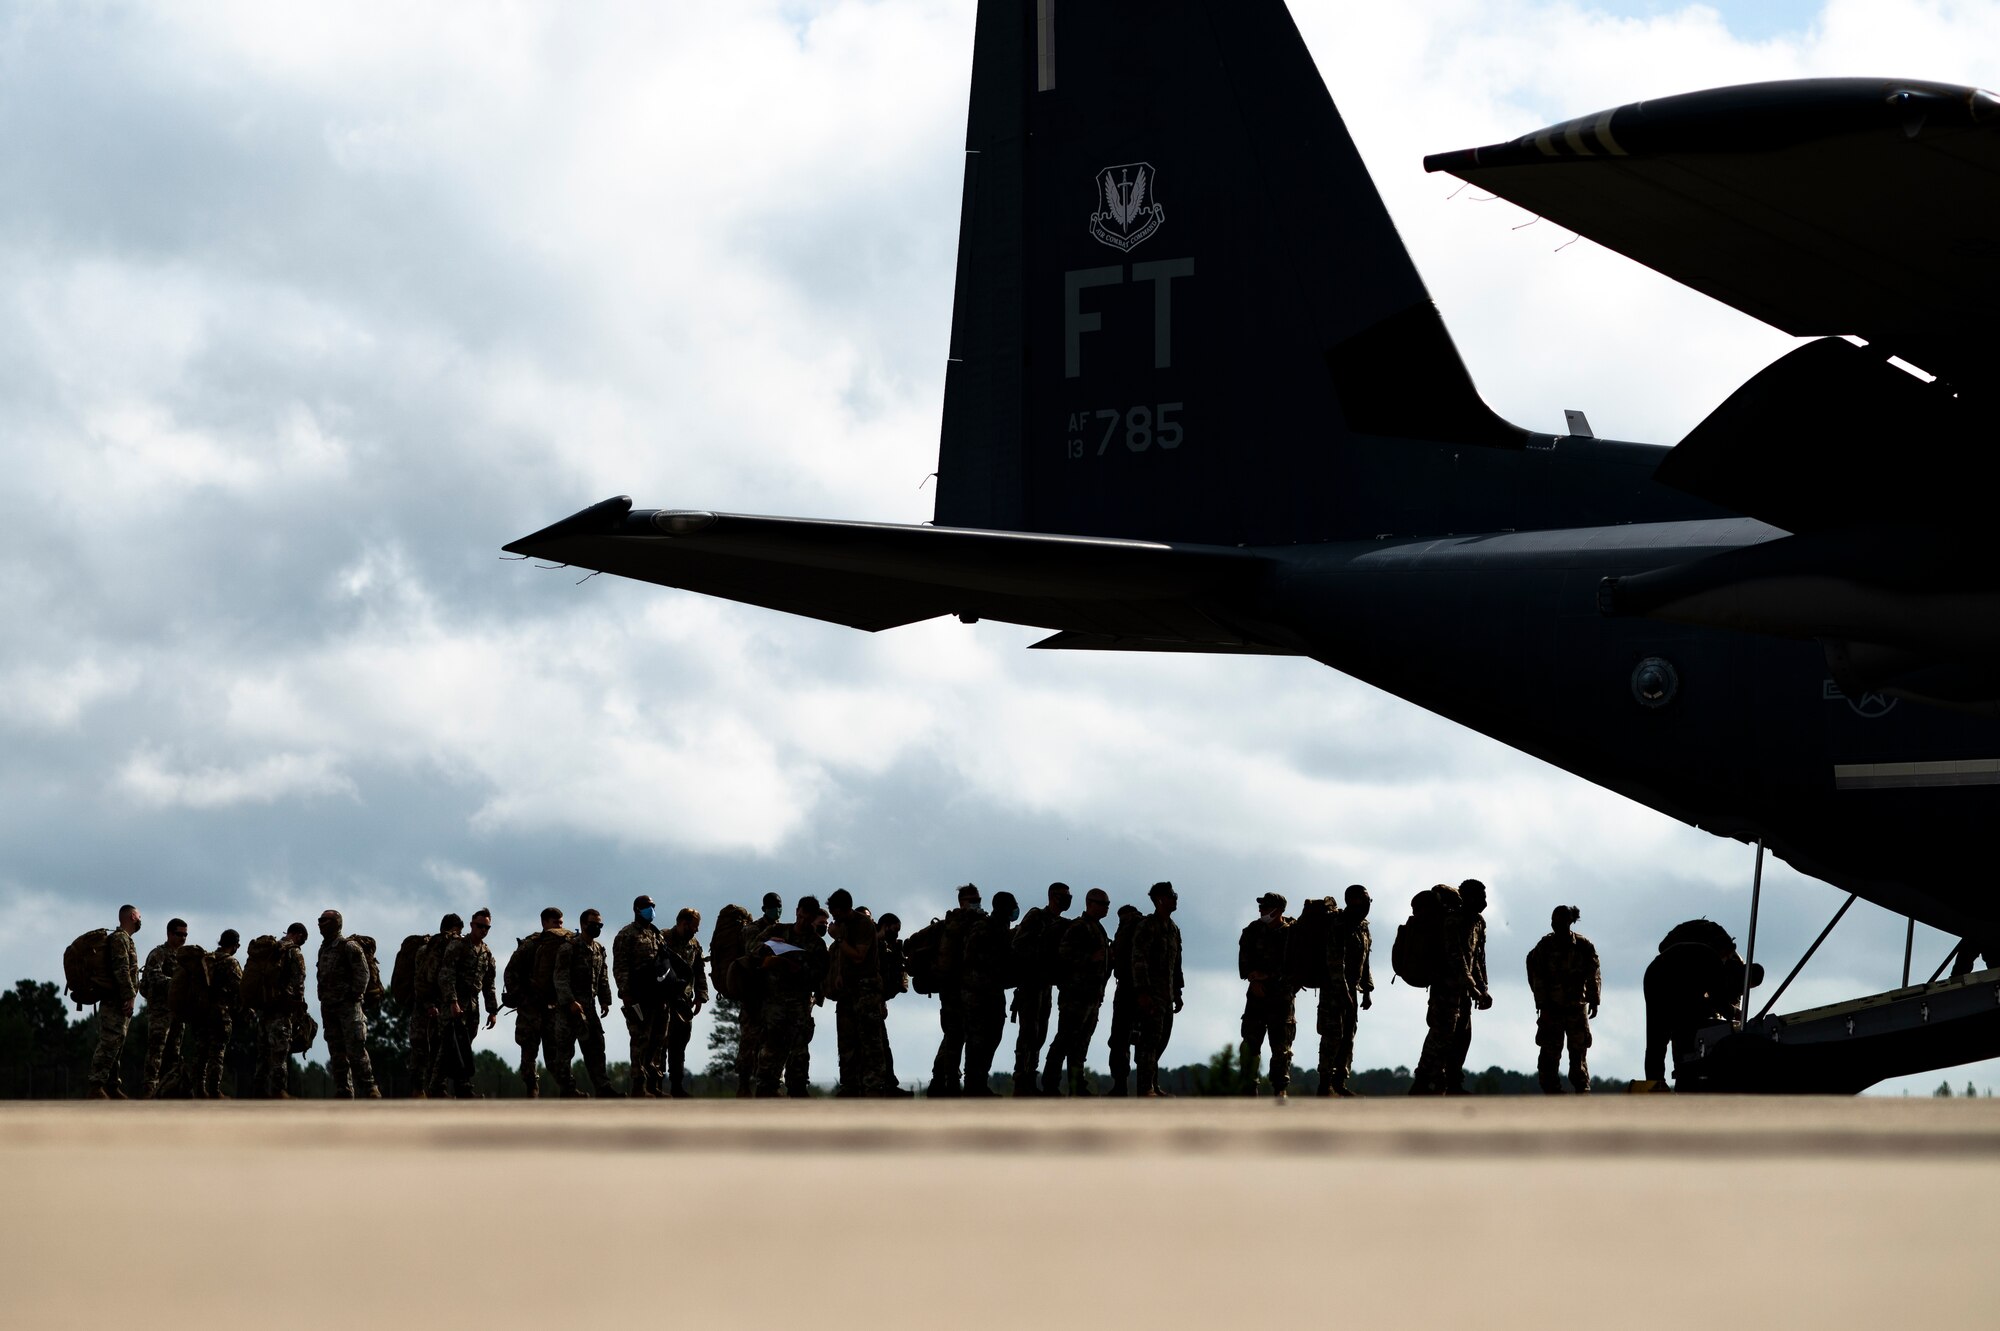 U.S. Air Force Airmen assigned to the 822nd Base Defense Squadron board an HC-130J Combat King II aircraft at Moody Air Force Base, Georgia, Aug. 29, 2021. The 822nd BDS were tasked to provide an enhanced security presence at Holloman Air Force Base, New Mexico, in support of Task Force – Holloman. The Department of Defense, through U.S. Northern Command, and in support of the Department of Homeland Security, is providing transportation, temporary housing, medical screening, and general support for at least 50,000 Afghan evacuees at suitable facilities, in permanent or temporary structures, as quickly as possible. This initiative provides Afghan personnel essential support at secure locations outside Afghanistan. (U.S. Air Force photo by Staff Sgt. Devin Boyer)